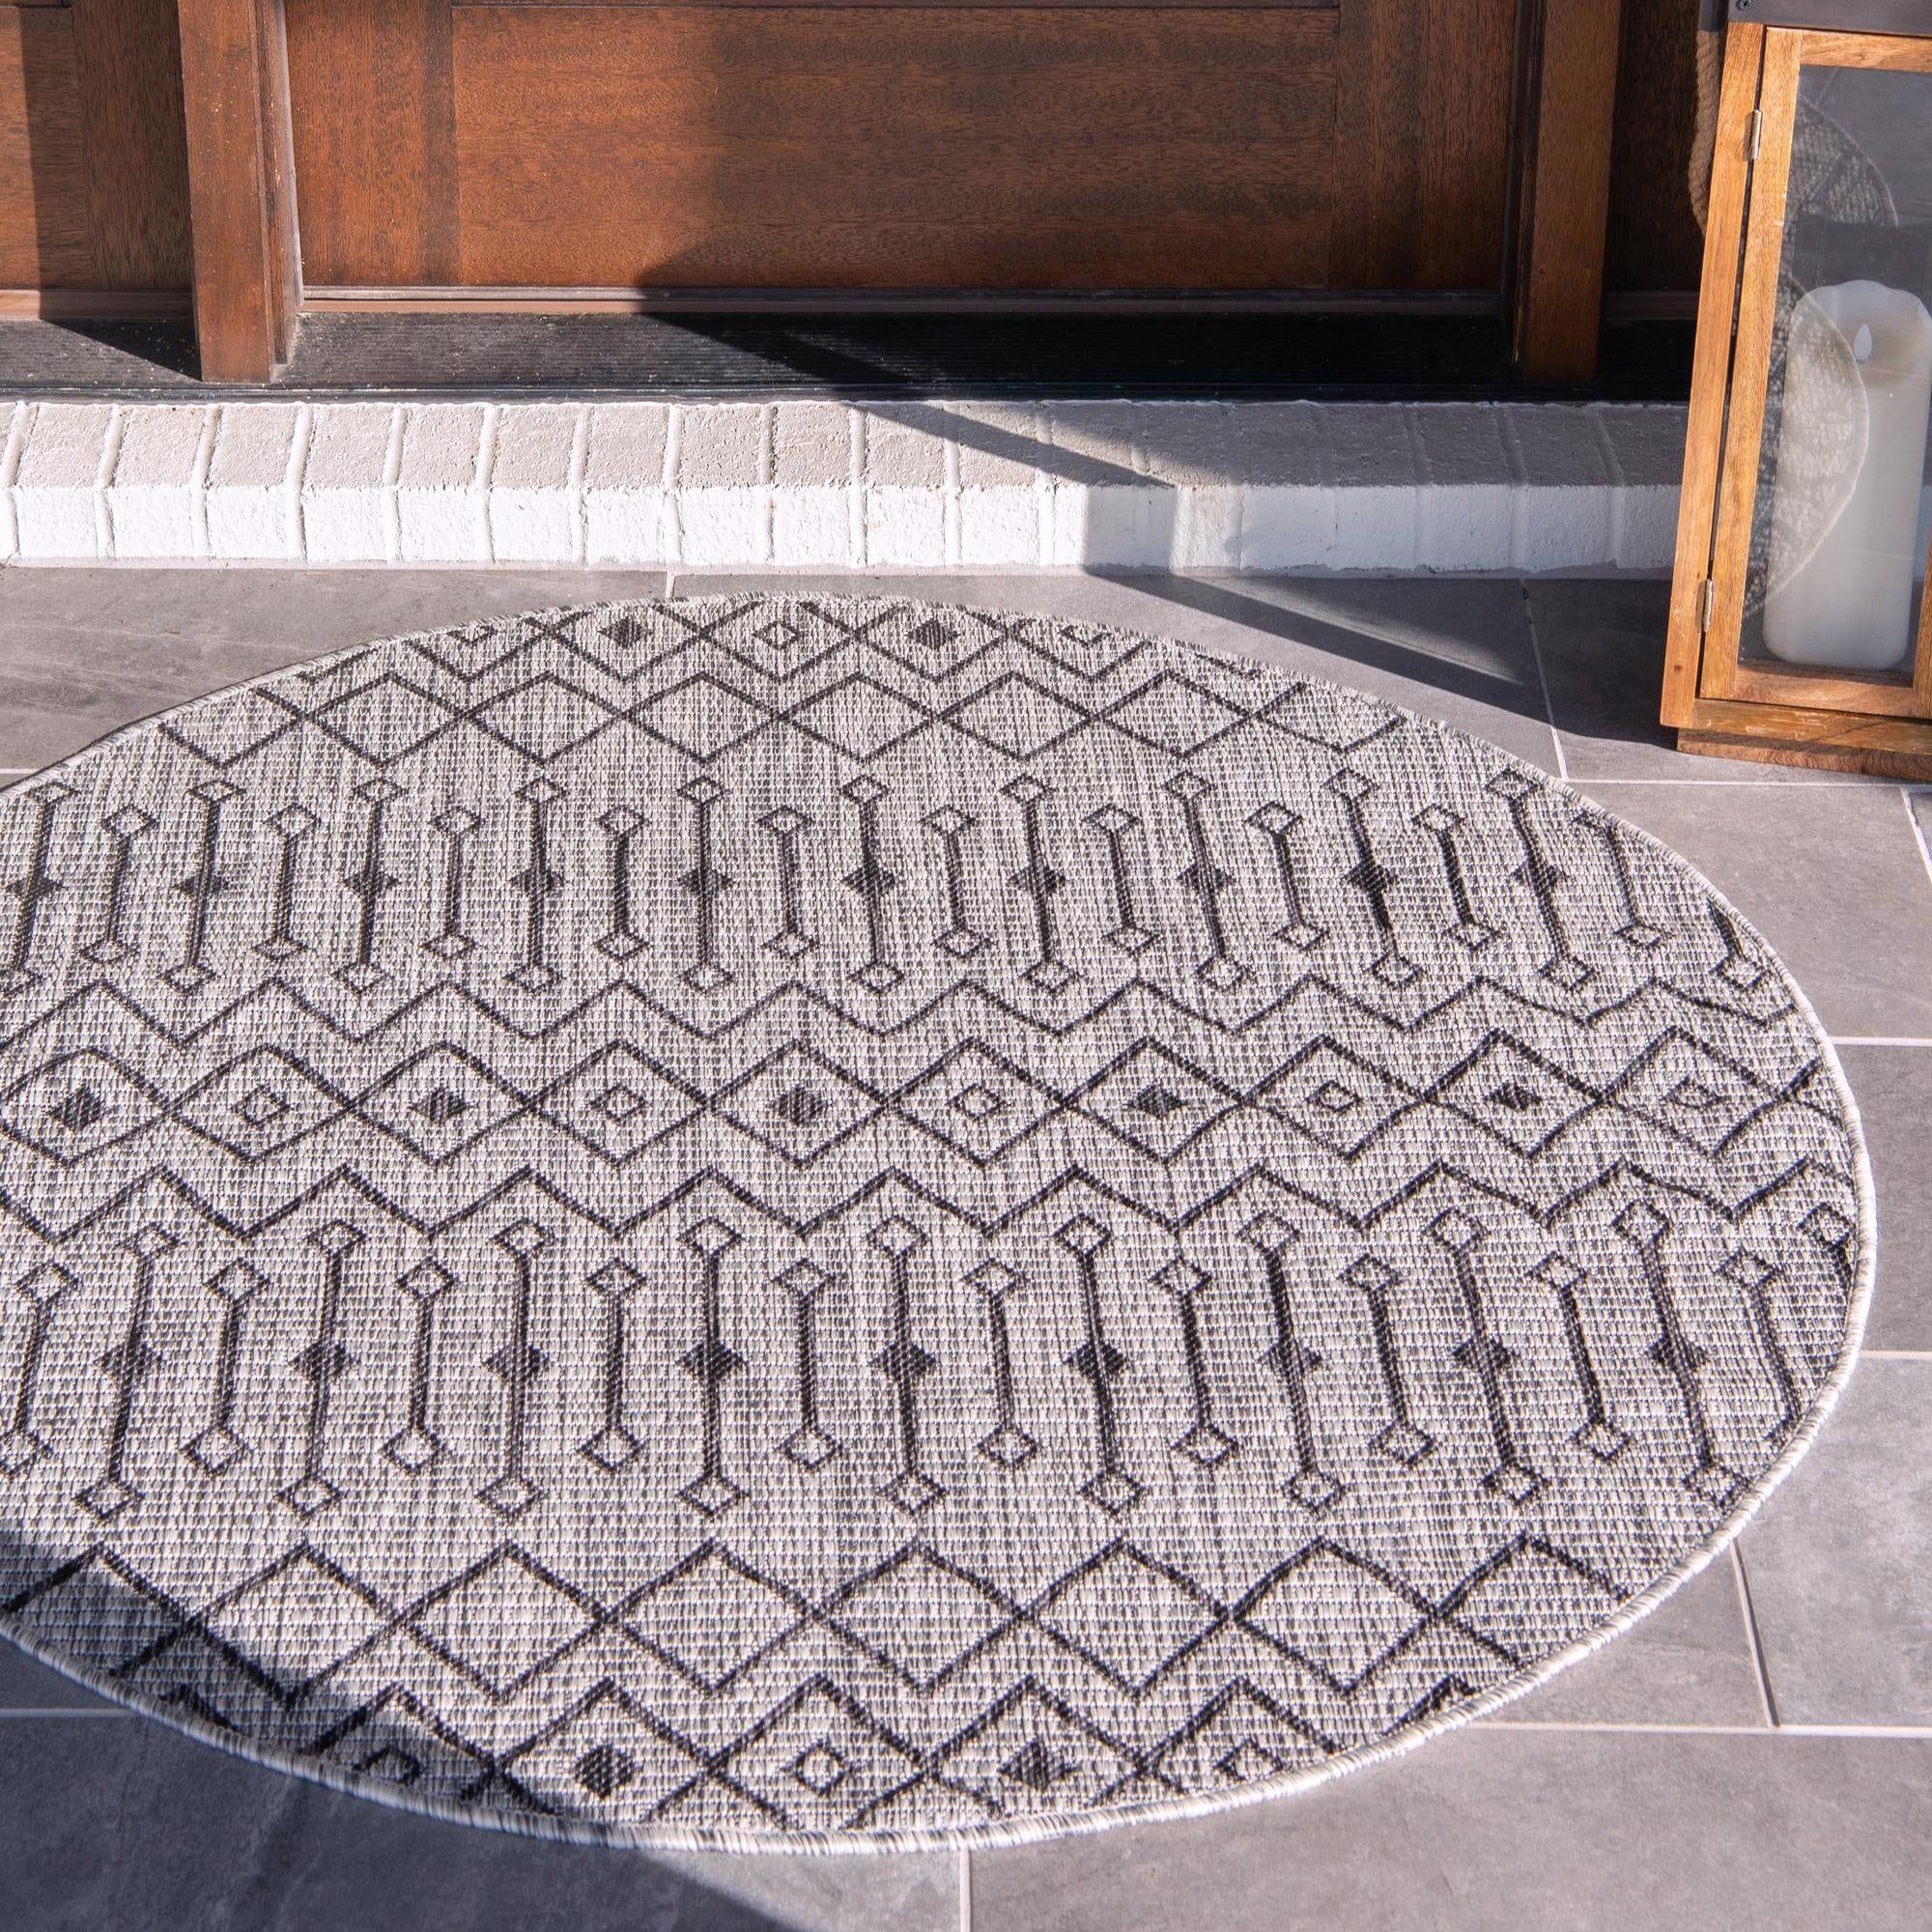 Unique Loom Tribal Trellis Indoor/outdoor Trellis Rug Gray/black 4' 1" Round  Geometric Tribal Perfect For Patio Deck Garage Entryway – Walmart Within Gray Bamboo Round Rugs (View 11 of 15)